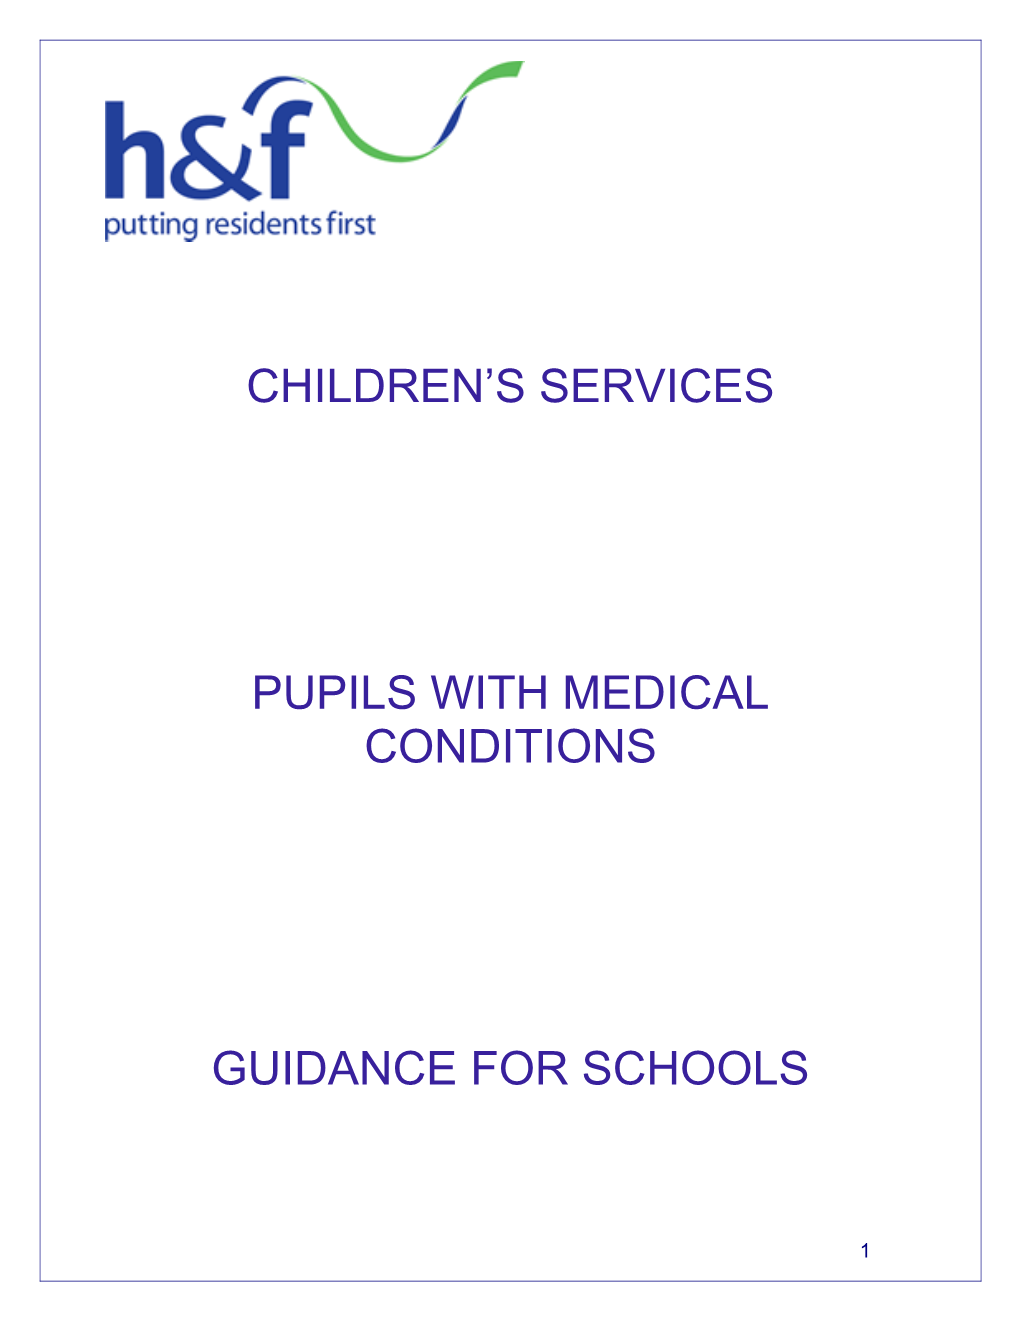 Pupils with Medical Conditions